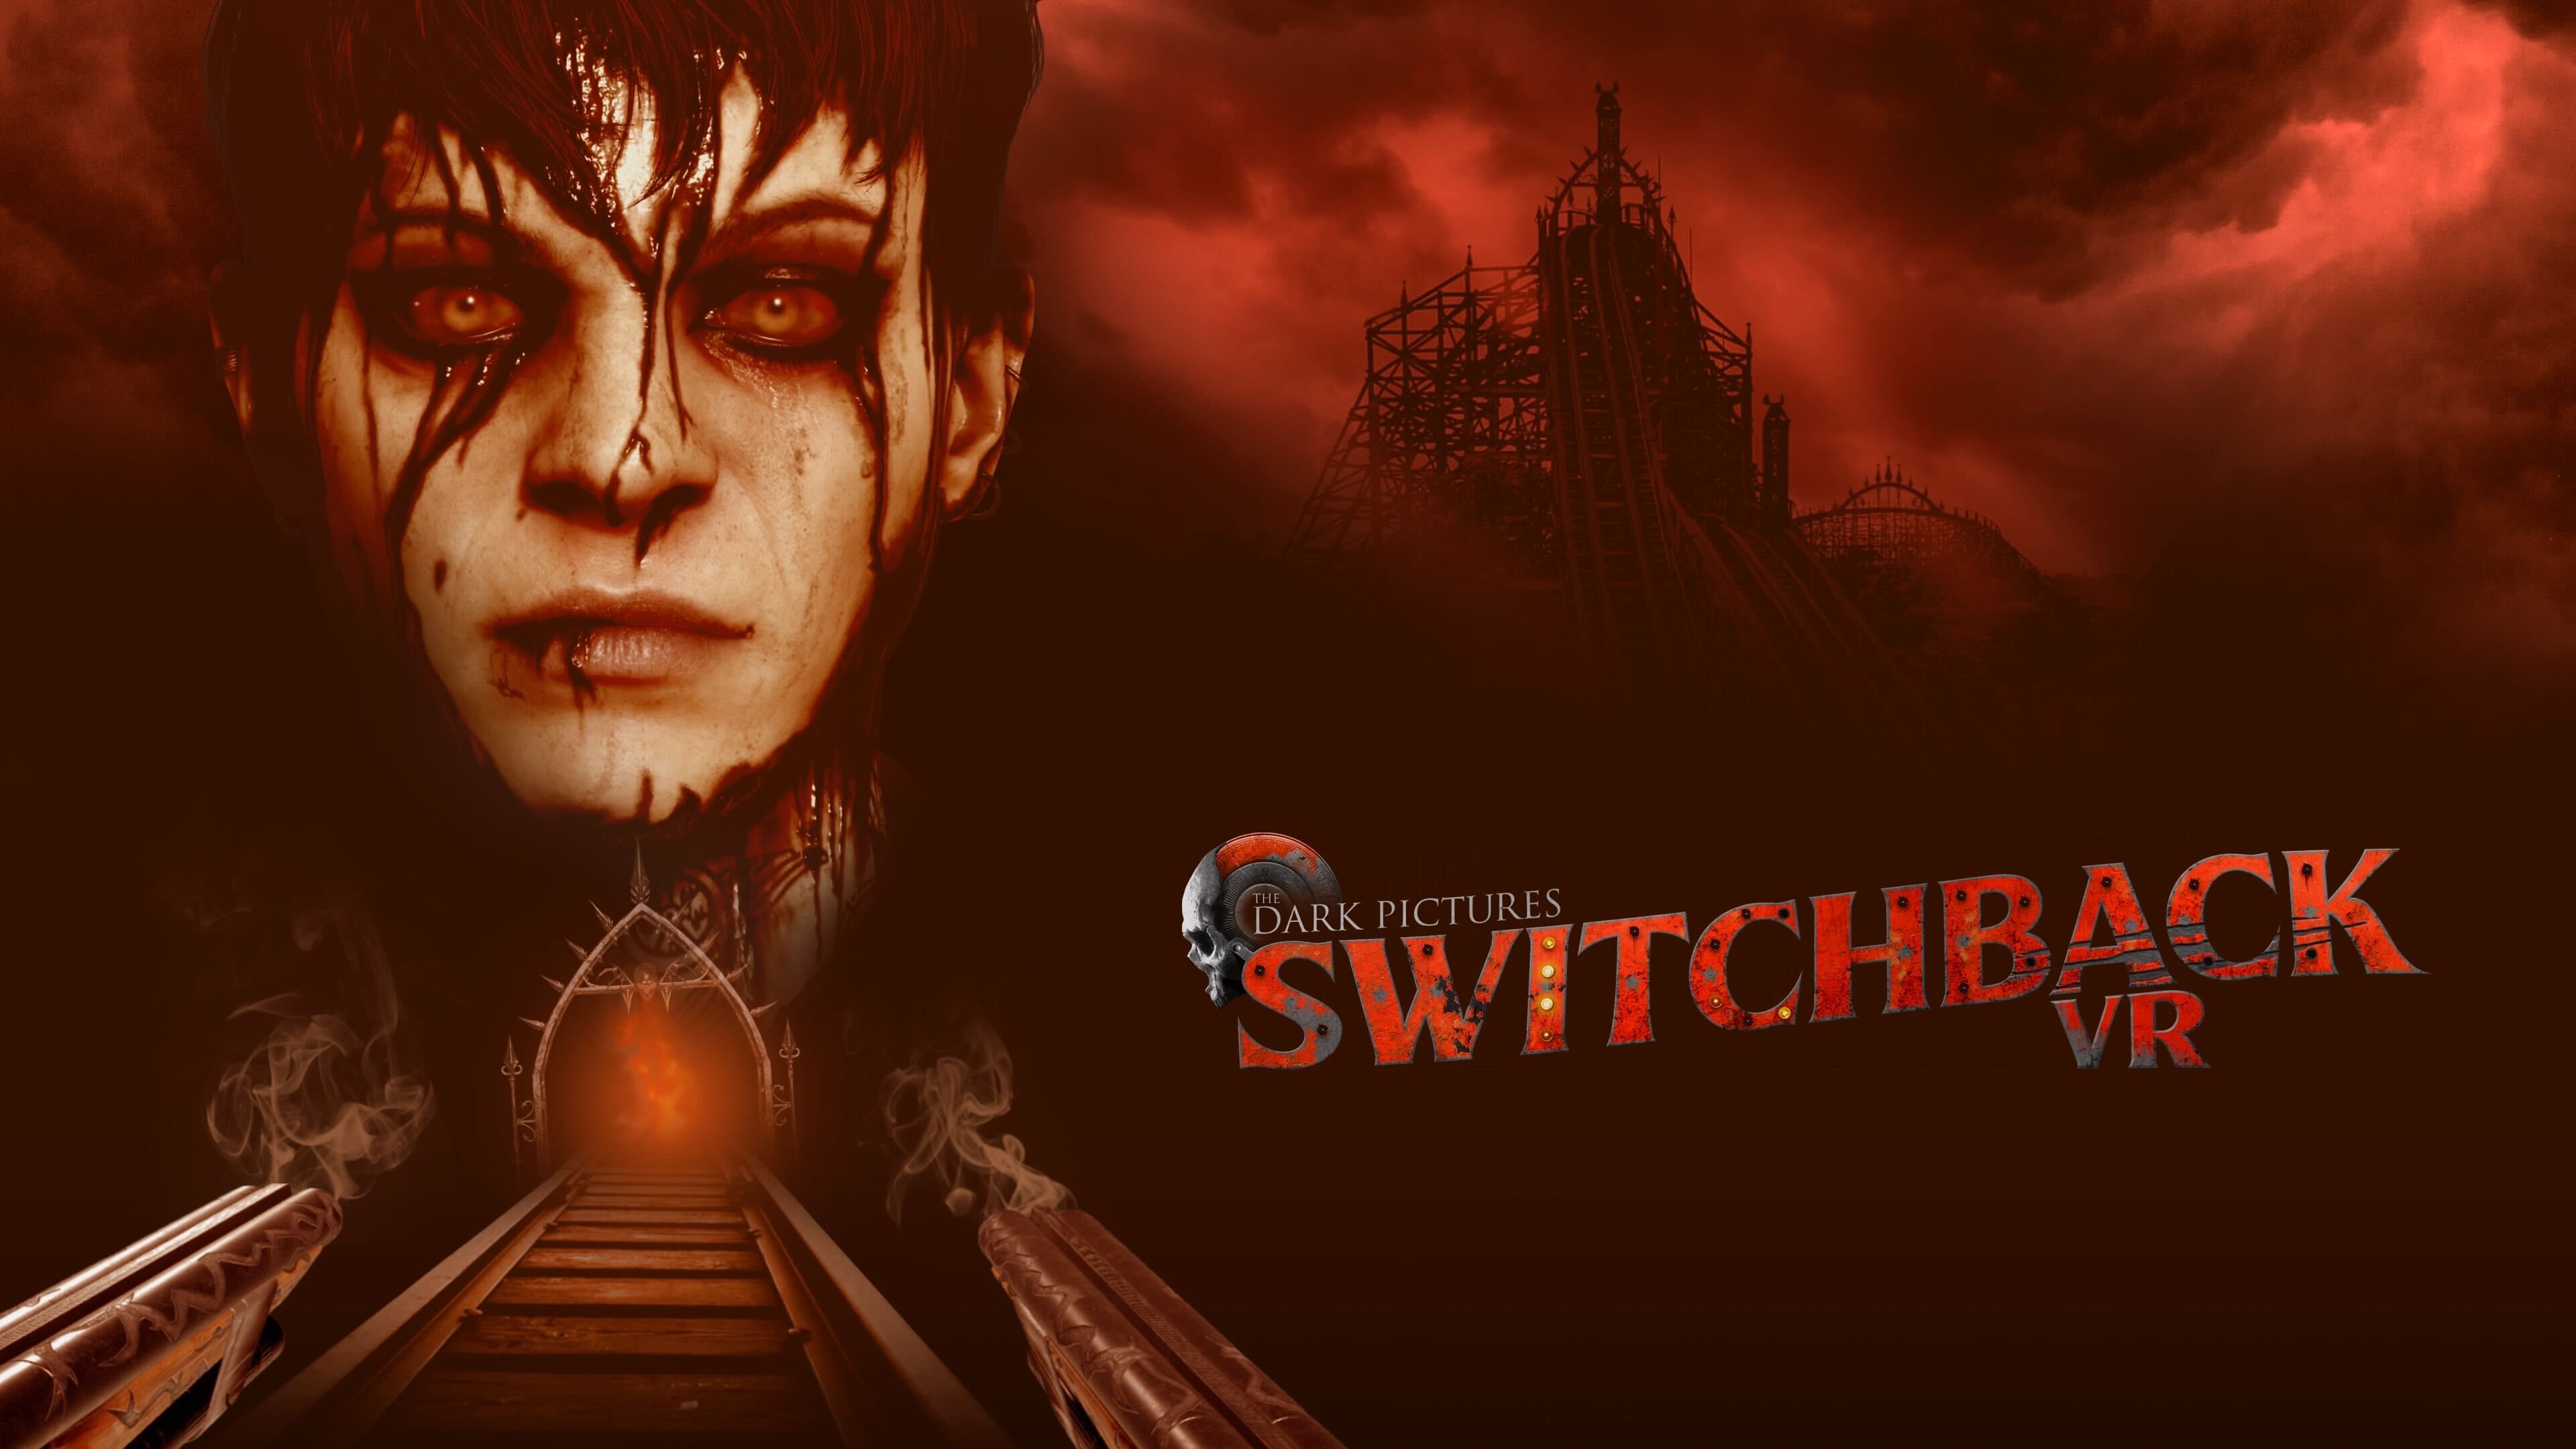 The Dark Pictures: Switchback VR - PS VR2 Games